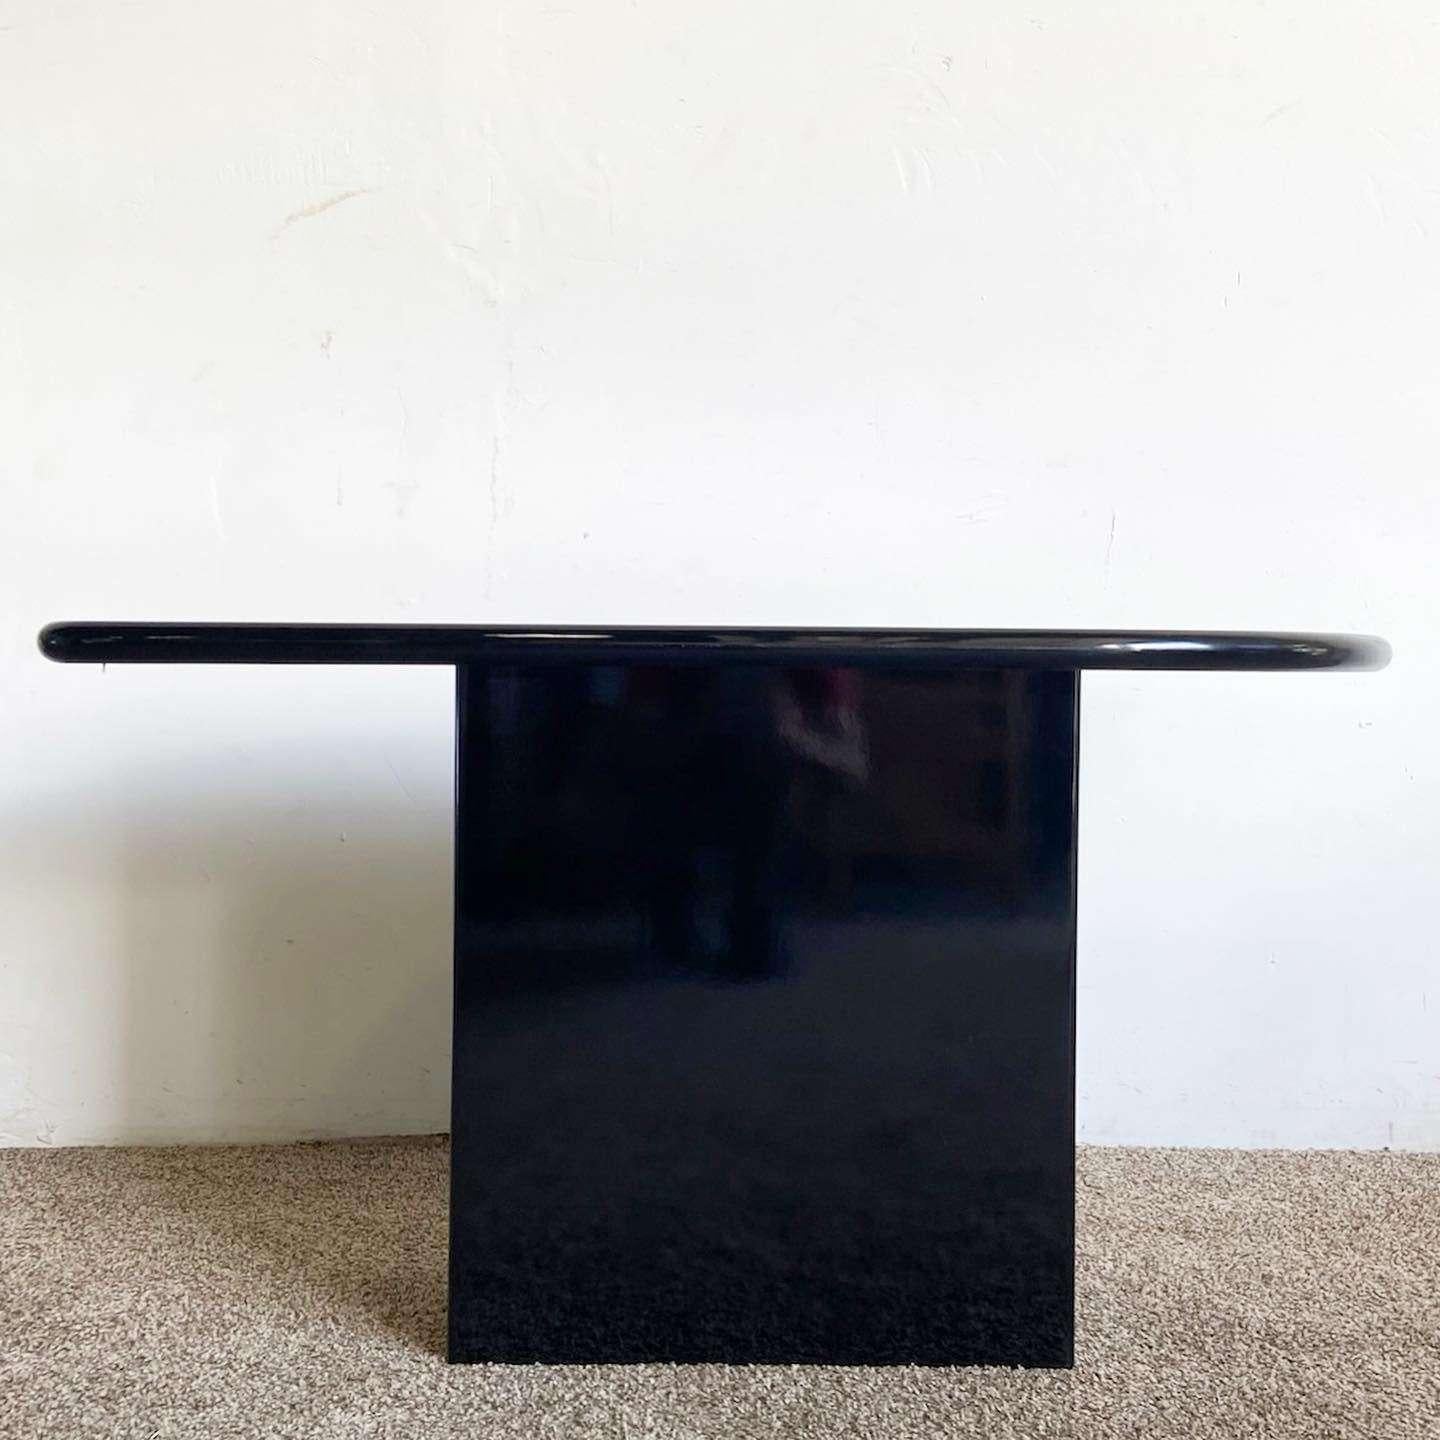 Wonderful vintage postmodern console table. Features a black finish throughout the surfaces.